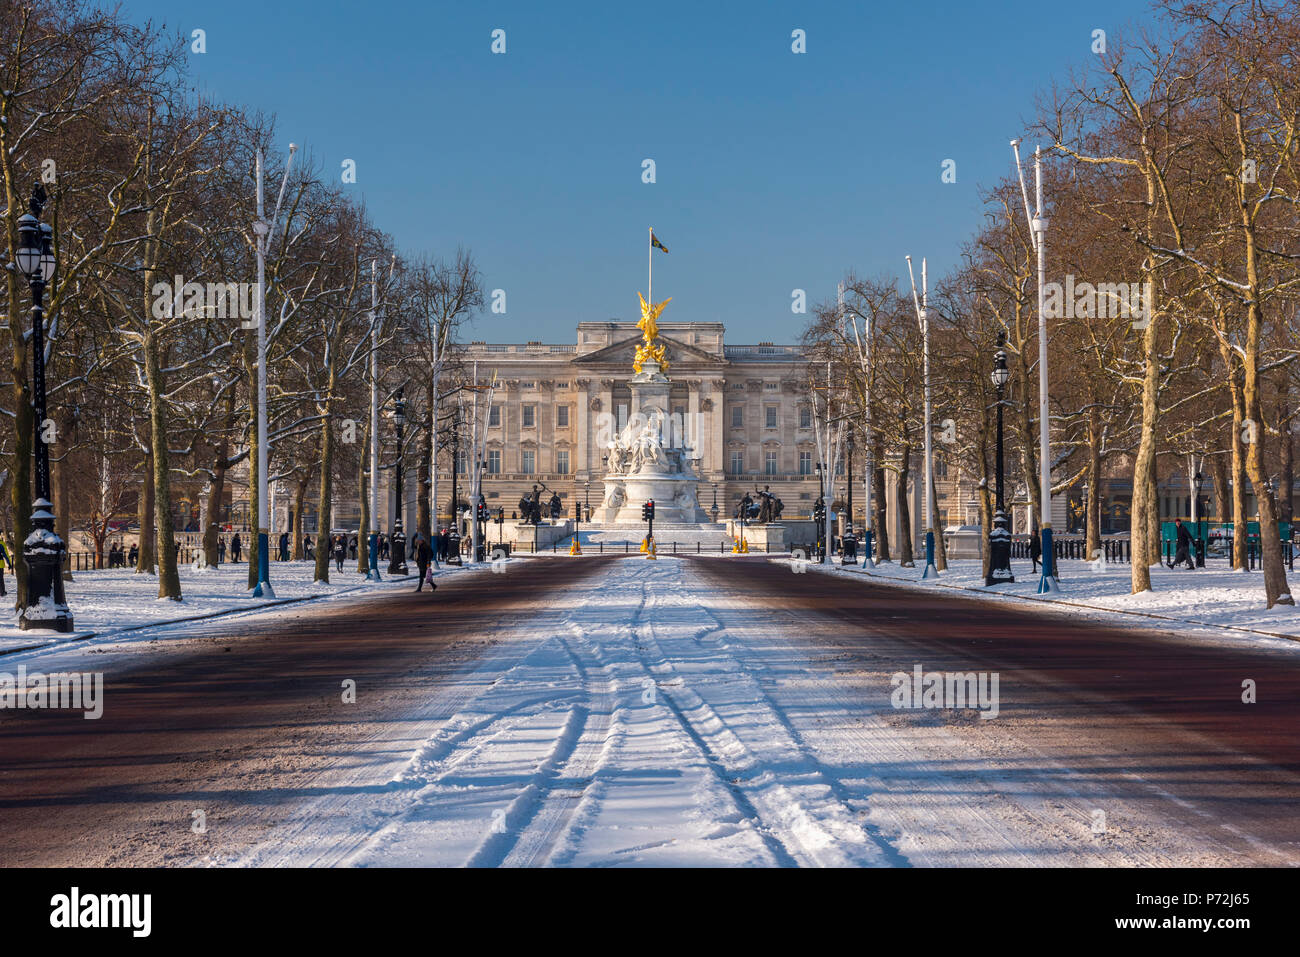 The Mall and Buckingham Palace in the snow, London, England, United Kingdom, Europe Stock Photo